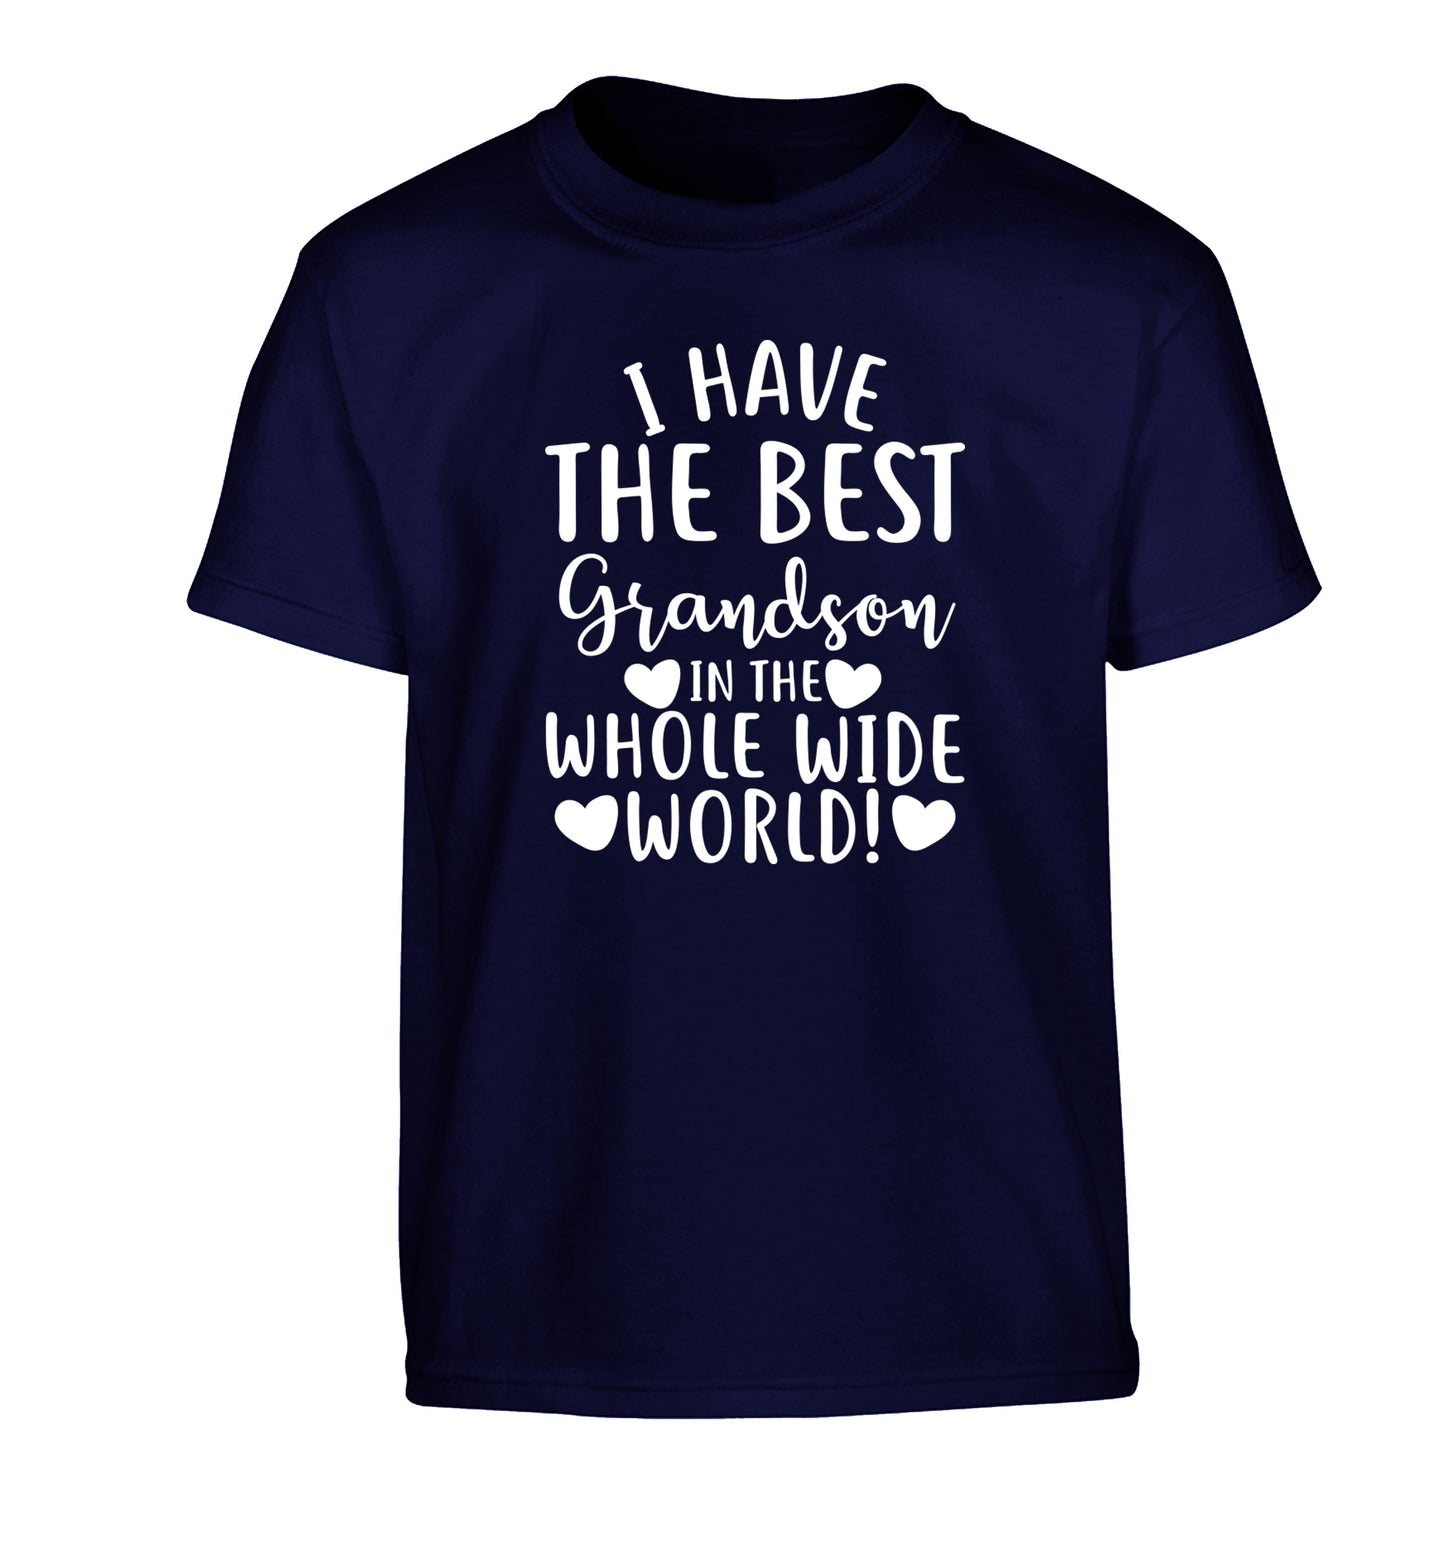 I have the best grandson in the whole wide world! Children's navy Tshirt 12-13 Years